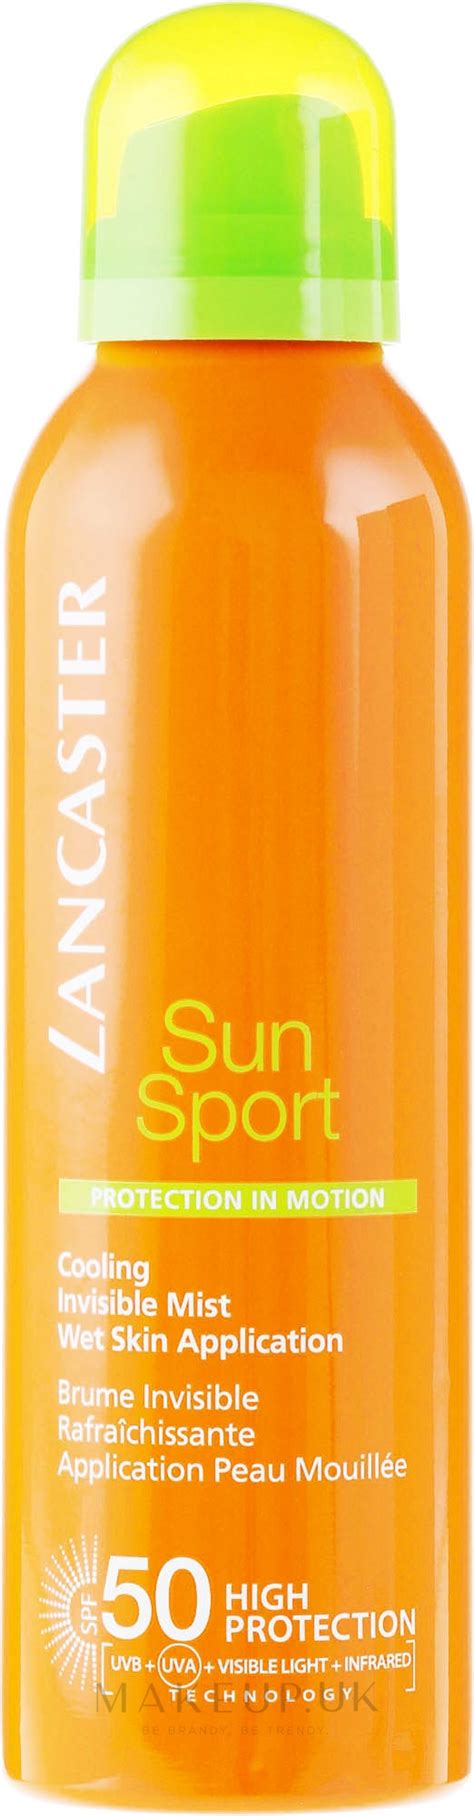 Lancaster Sun Sport Cooling Invisible Mist Spf50 Cooling Sun Protection Spray Makeup Uk